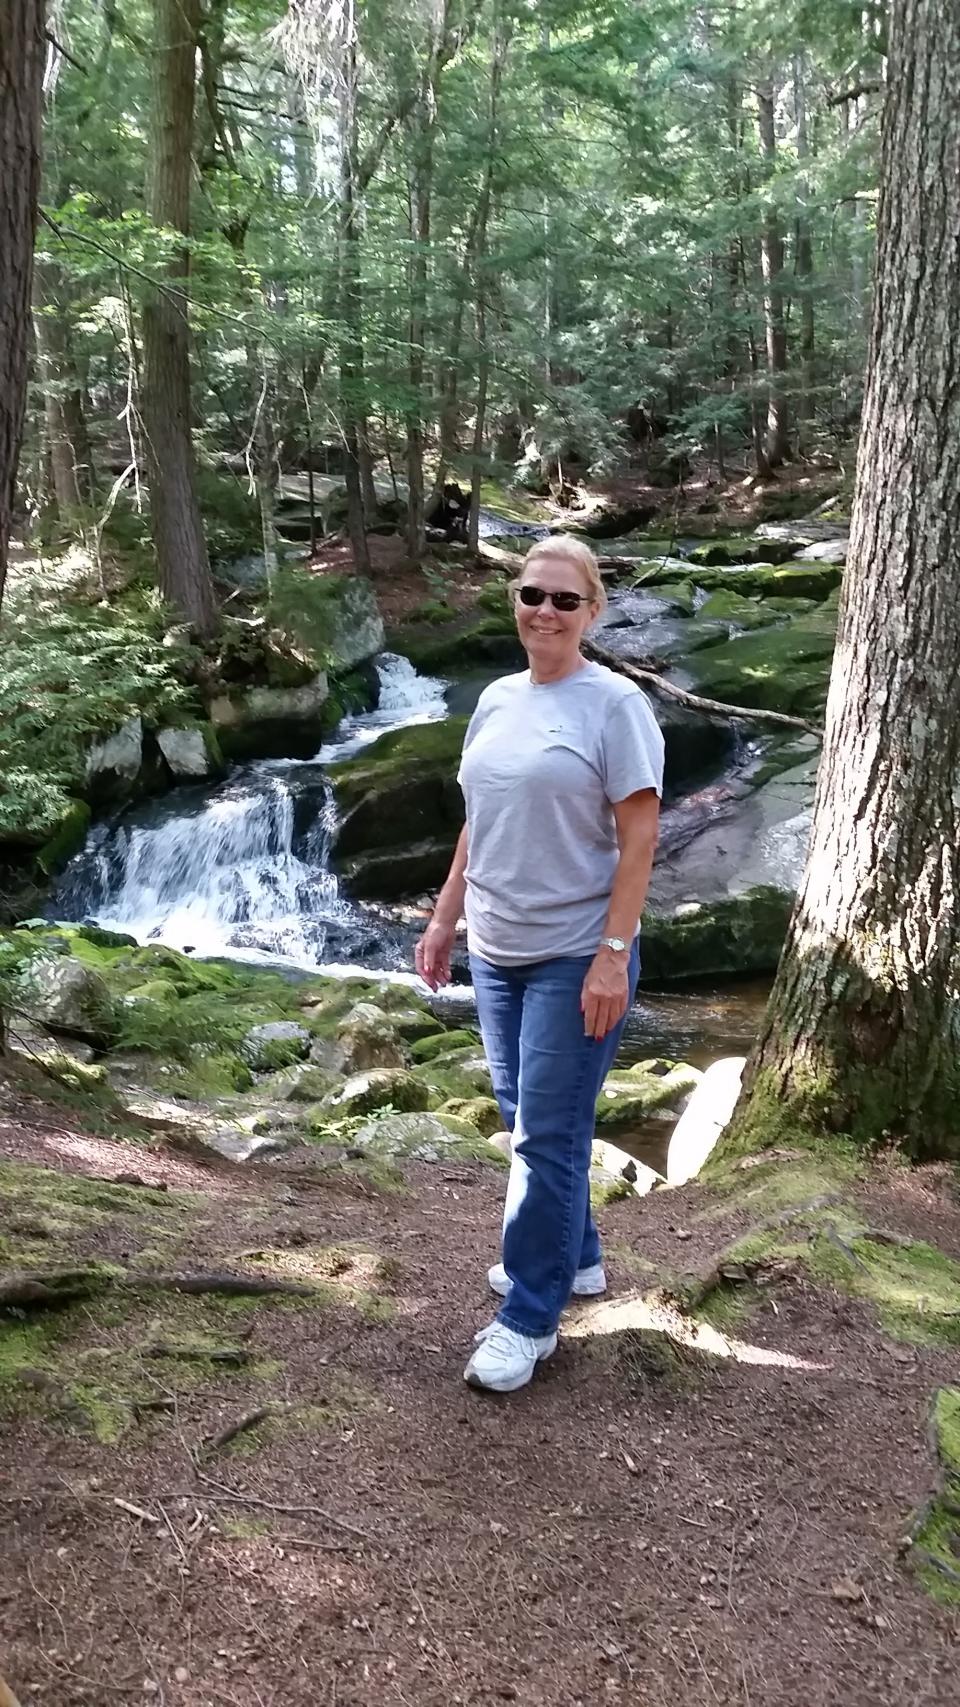 Cathy at the waterfall.